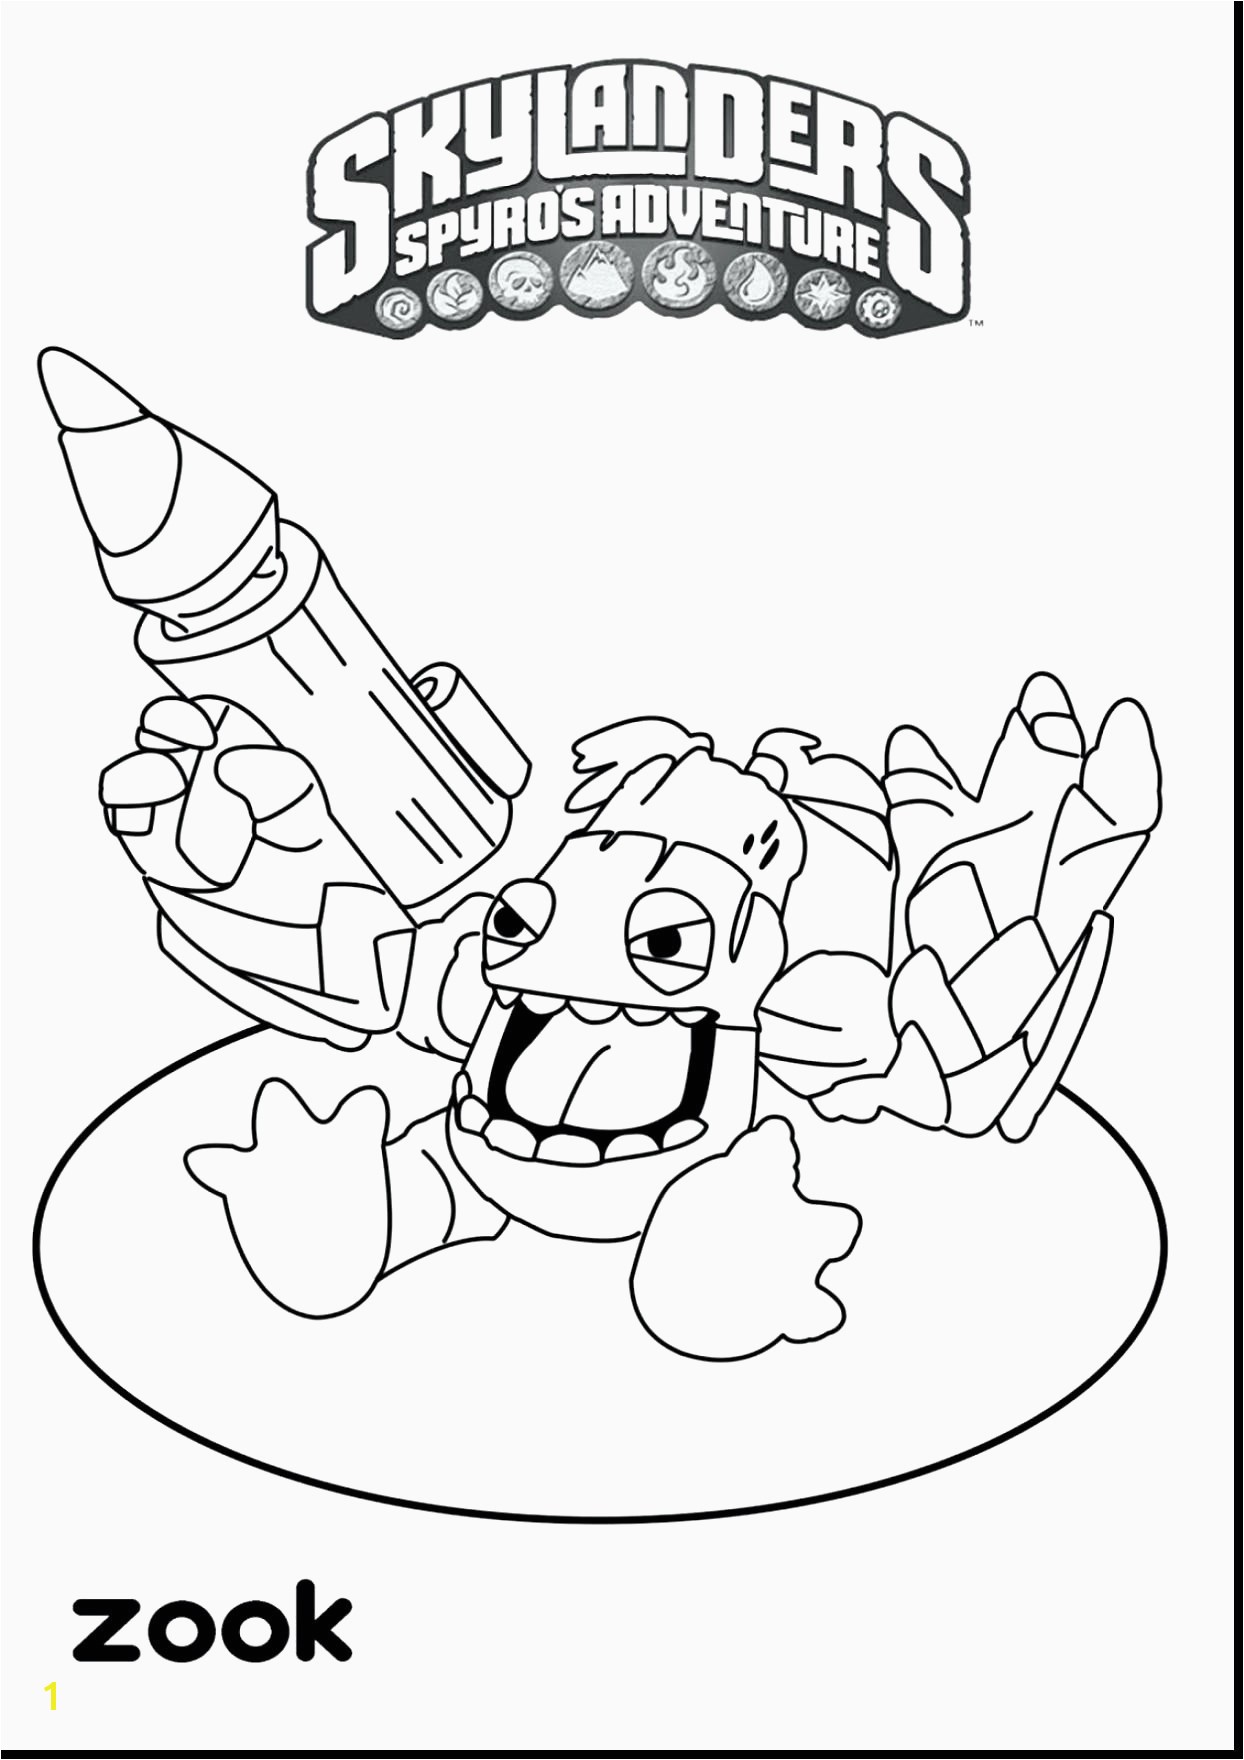 Crayola Coloring Pages Star Wars Awesome Crayola Coloring Pages Barbie Katesgrove